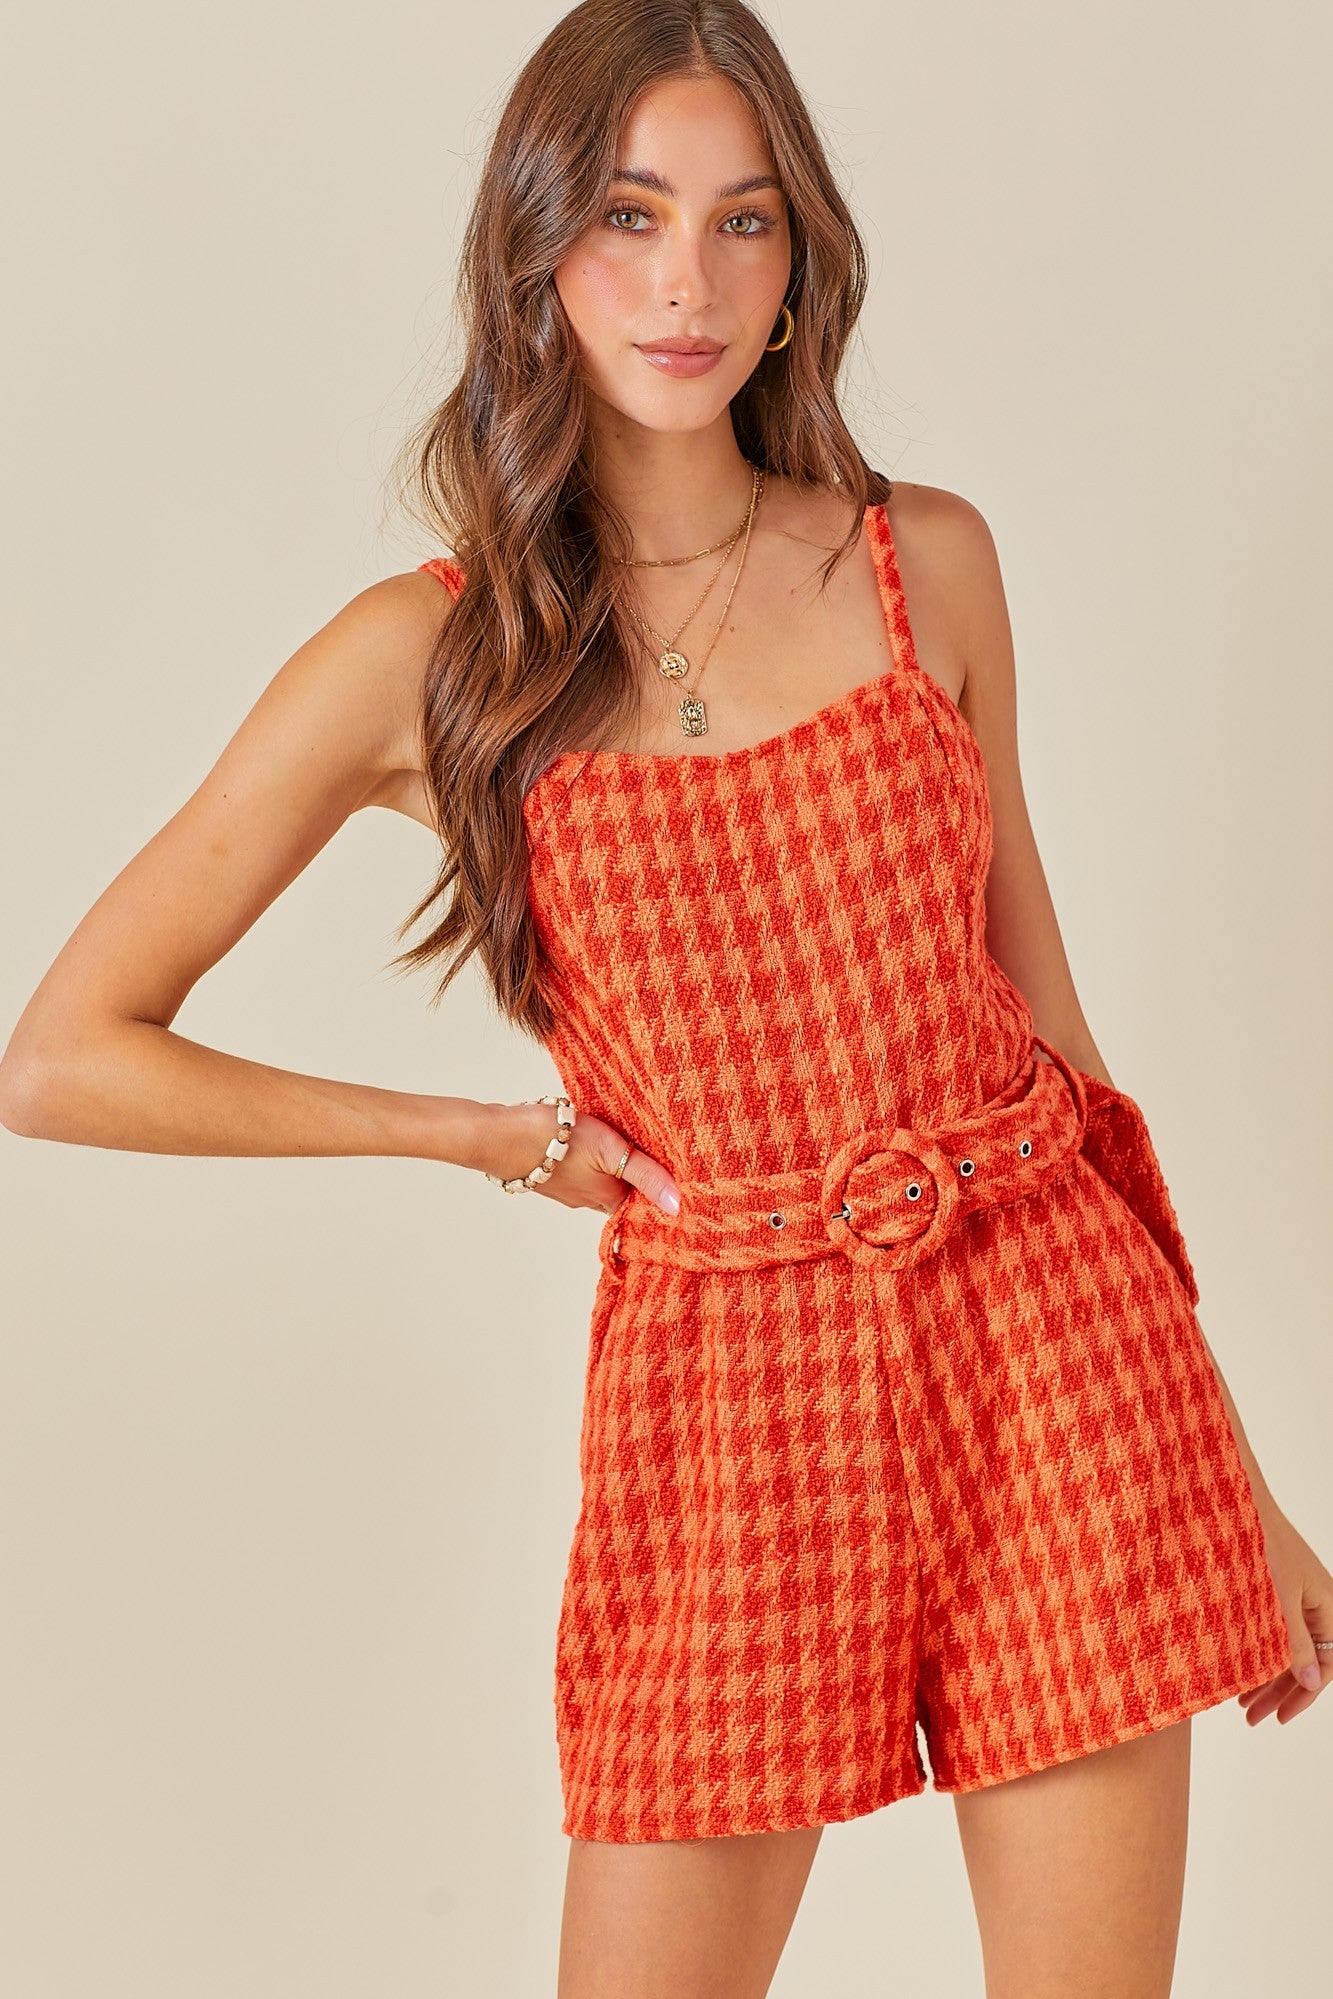 "Beverly Hills" Tweed Romper - Sunkist Two Toned